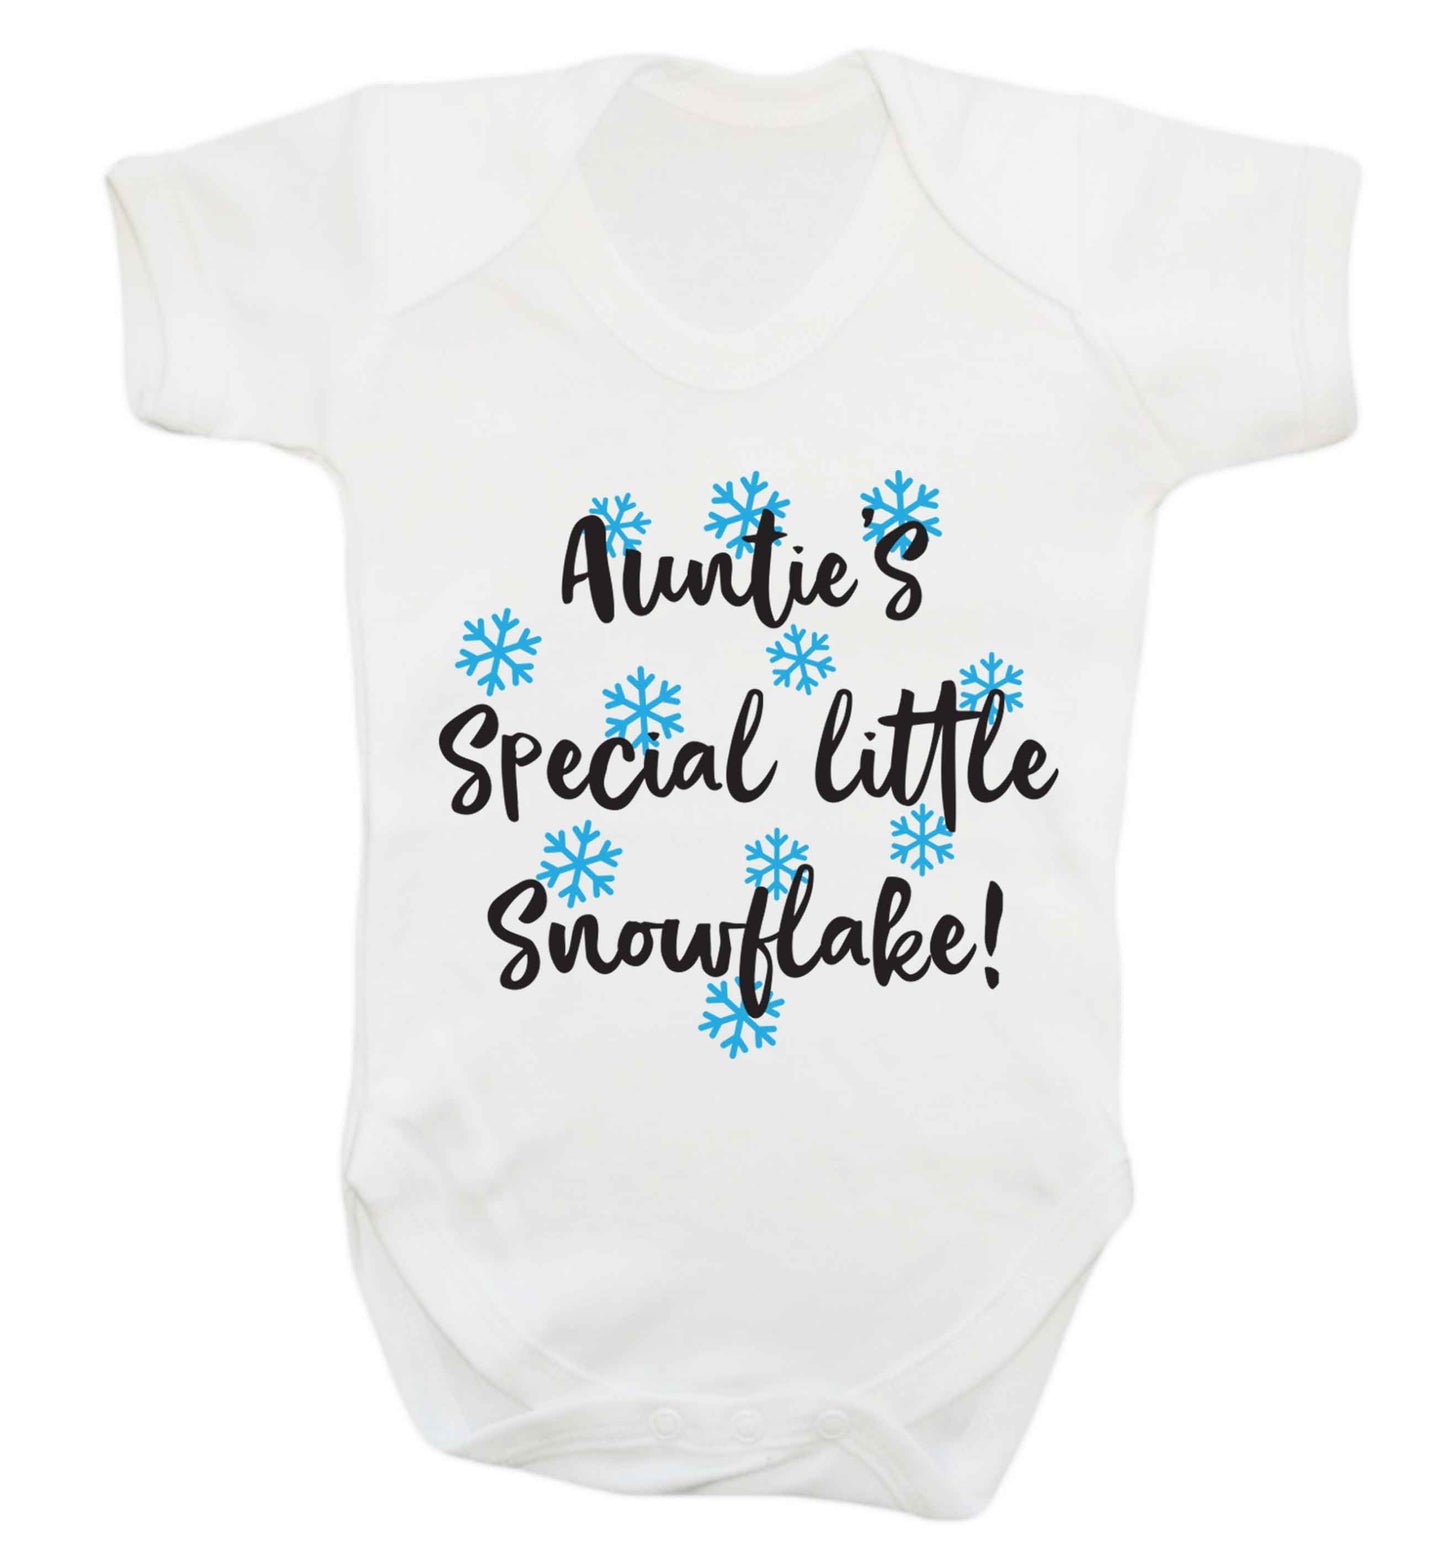 Auntie's special little snowflake Baby Vest white 18-24 months